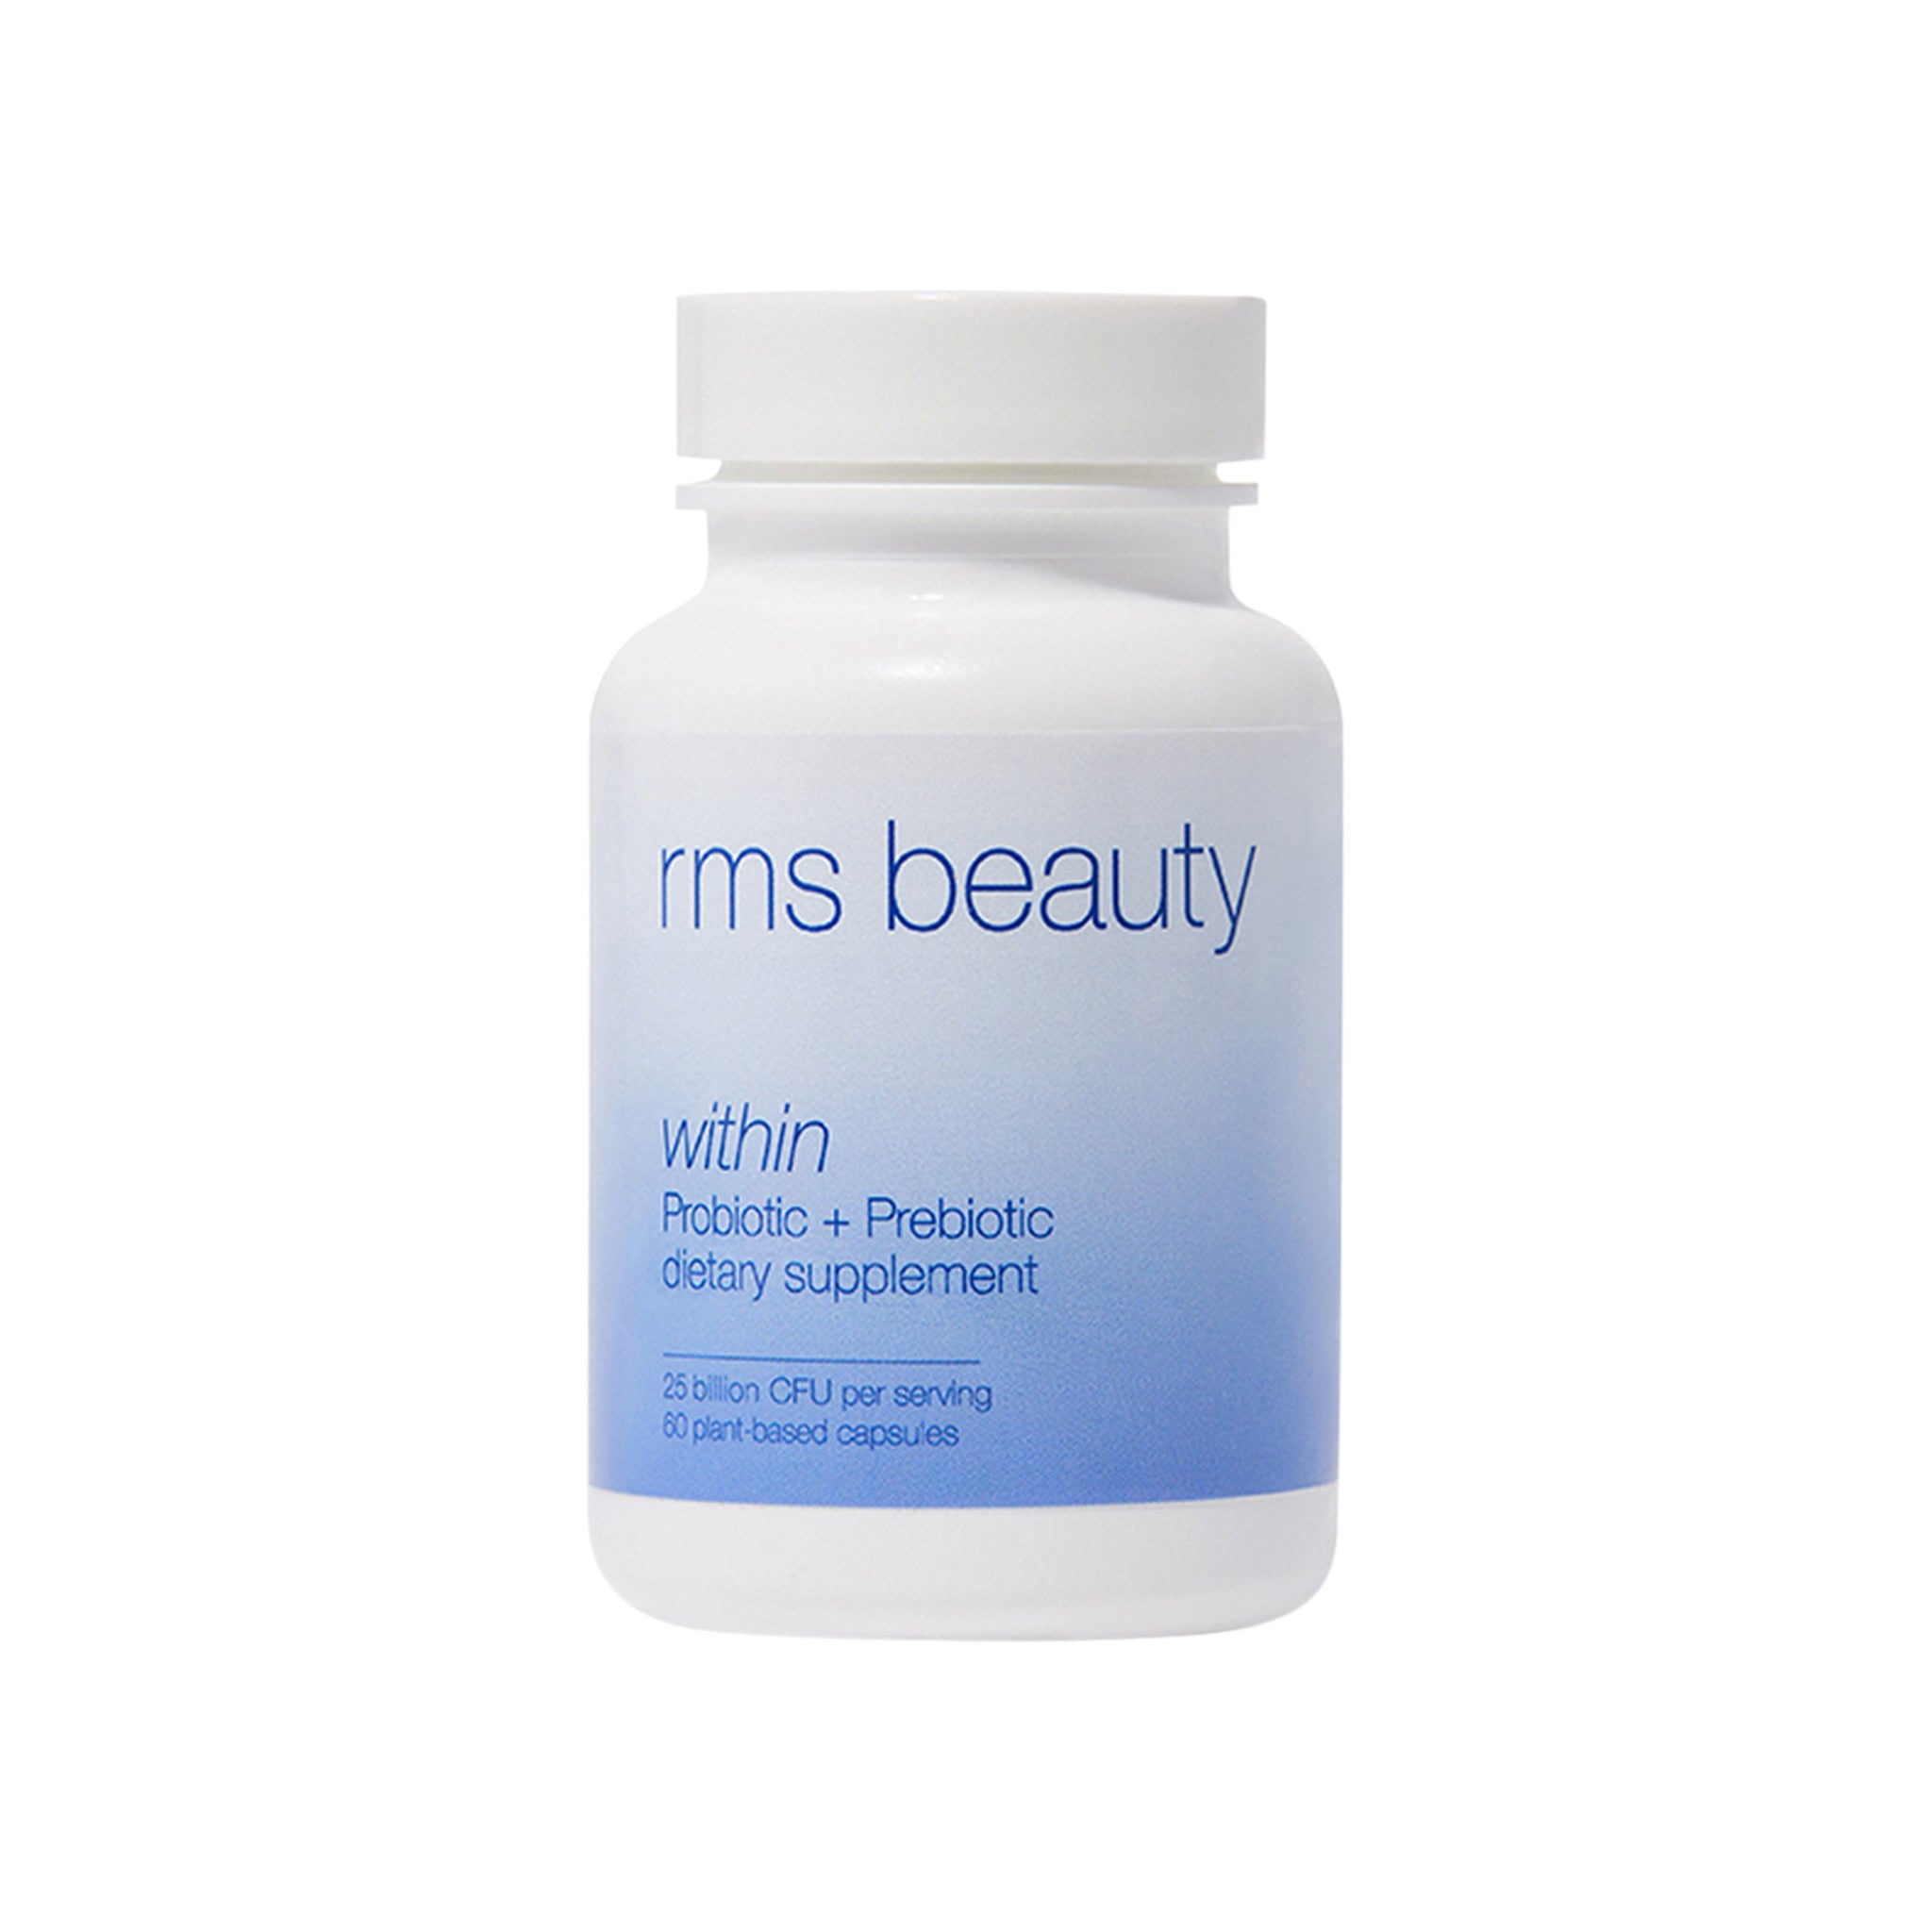 RMS Beauty Within Probiotic and Prebiotic main image.